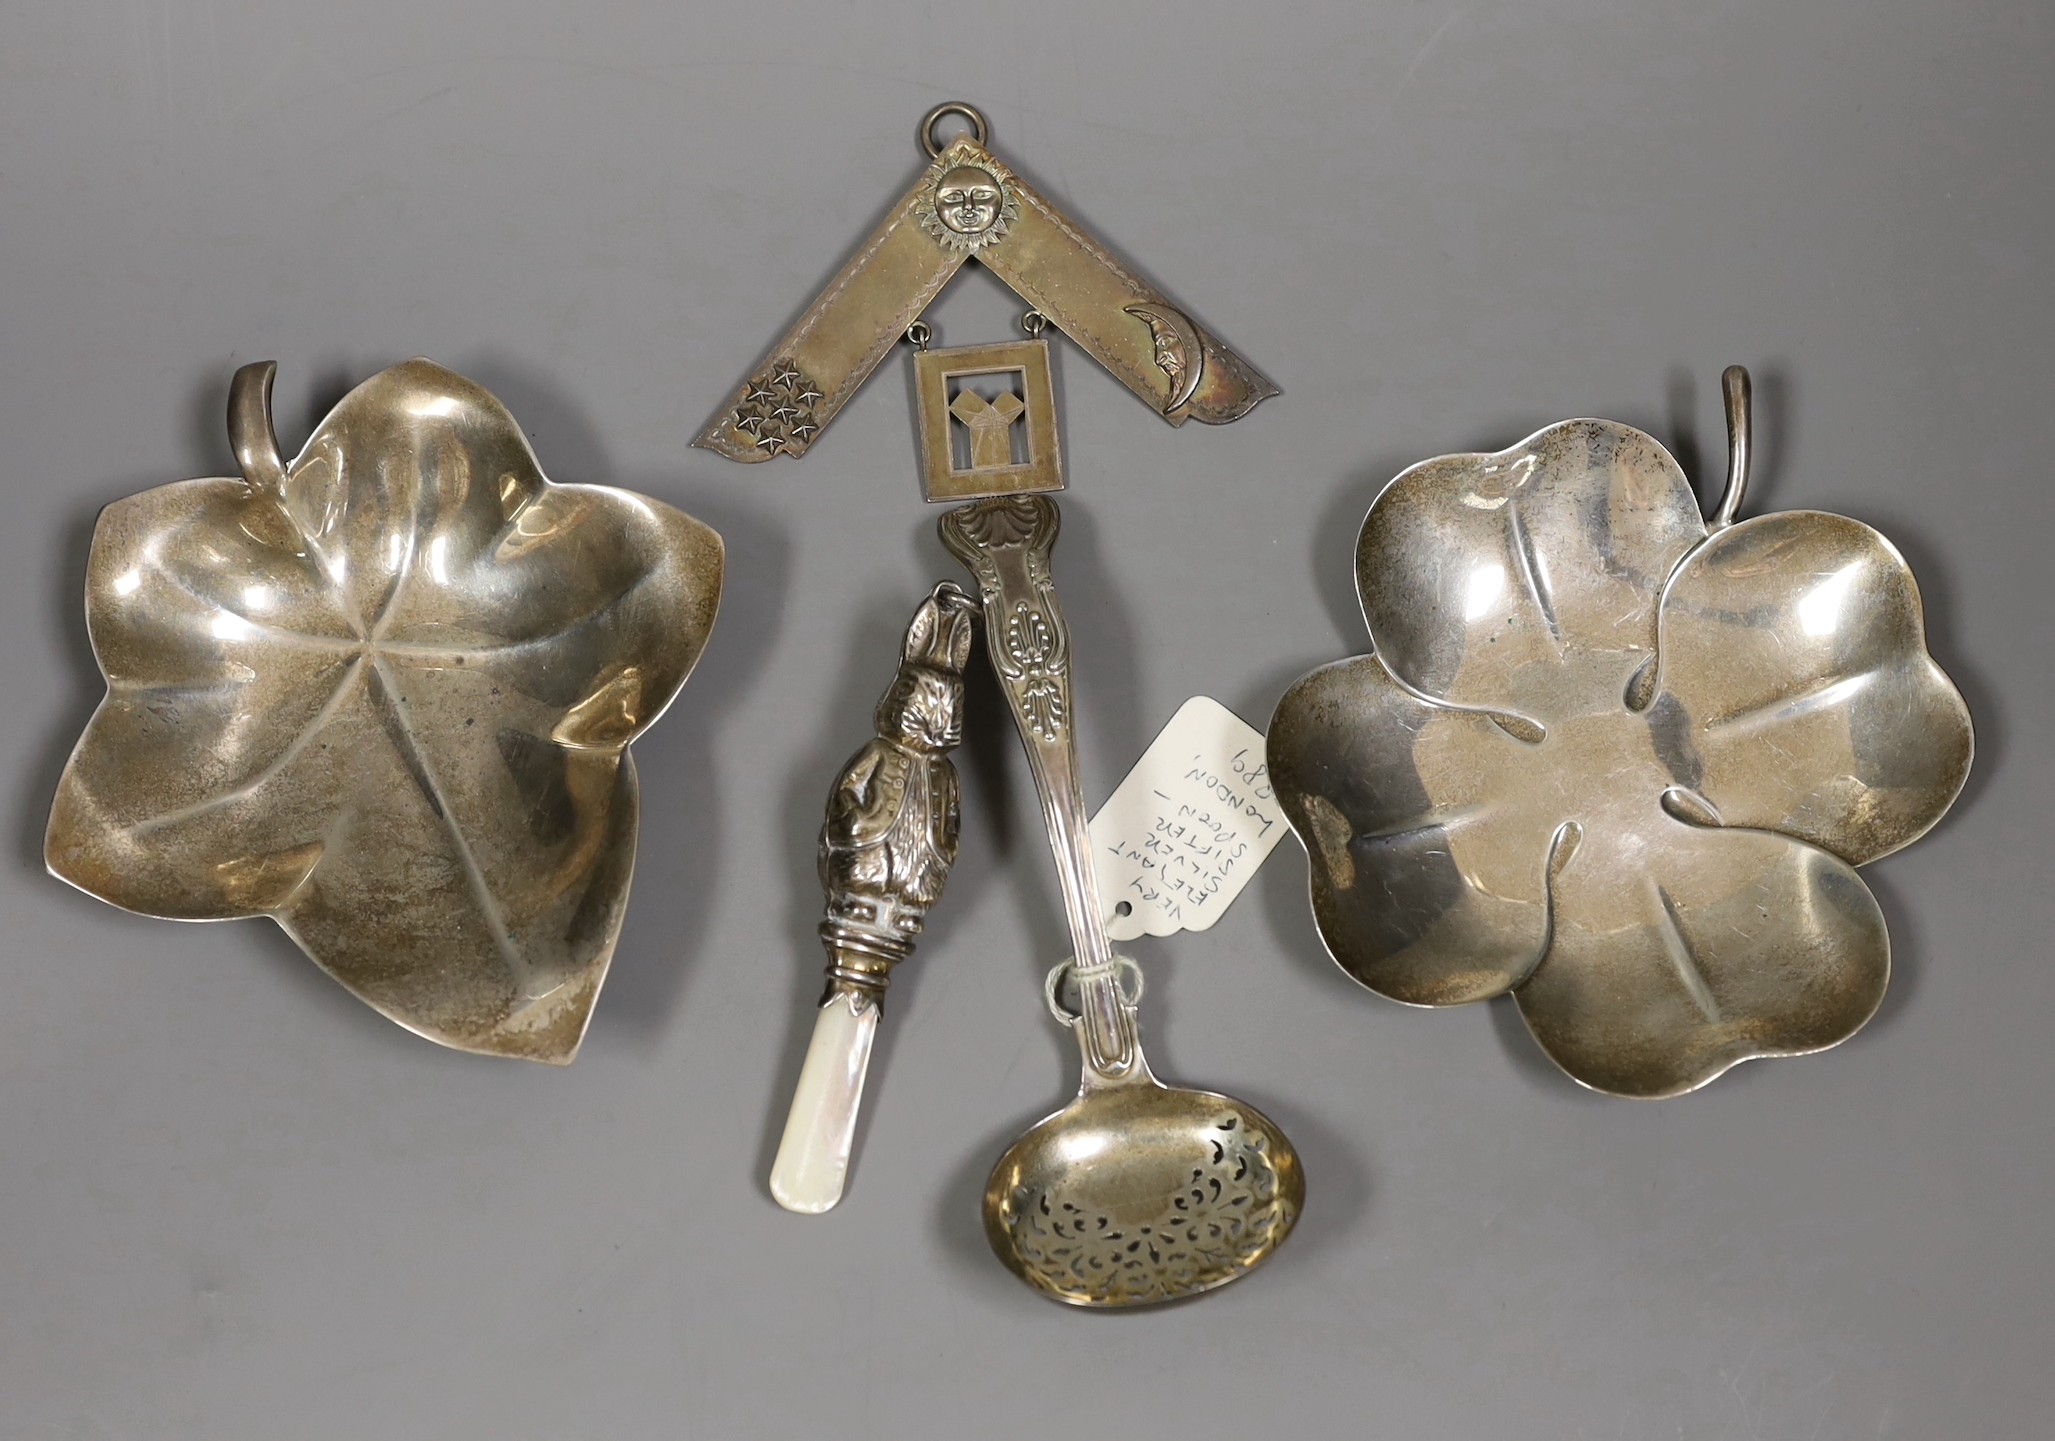 Two Tiffany & Co sterling leaf dishes, largest 14.6cm and three other items including a child's silver rattle, silver masonic jewel and a late Victorian silver sifter spoon.